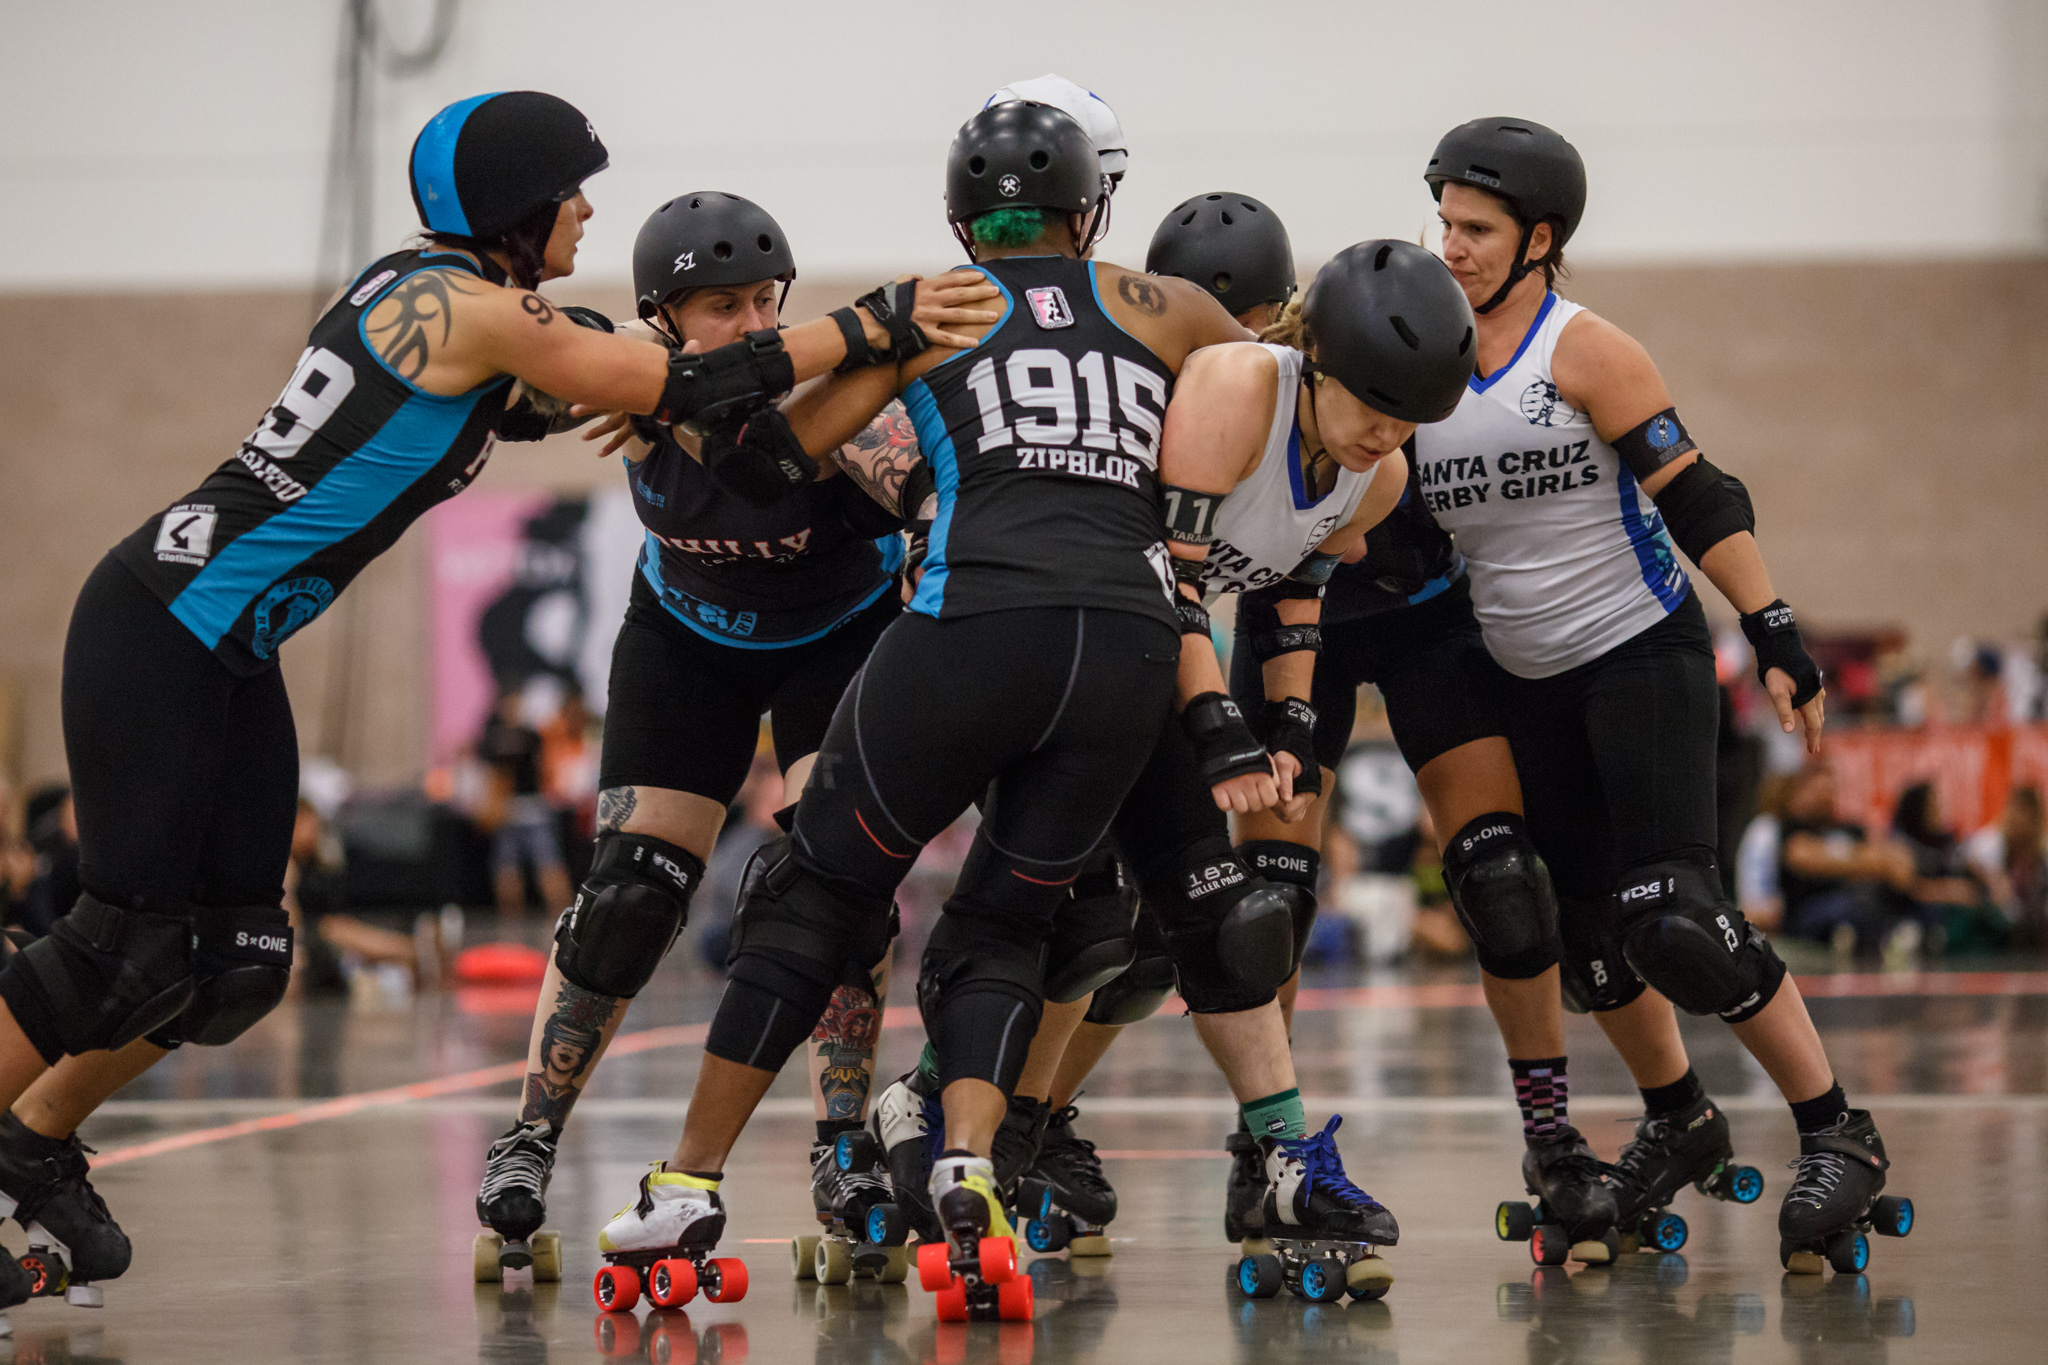 Philly and Santa Cruz battle for position during the 2017 International WFTDA D1 Playoffs in Dallas, TX